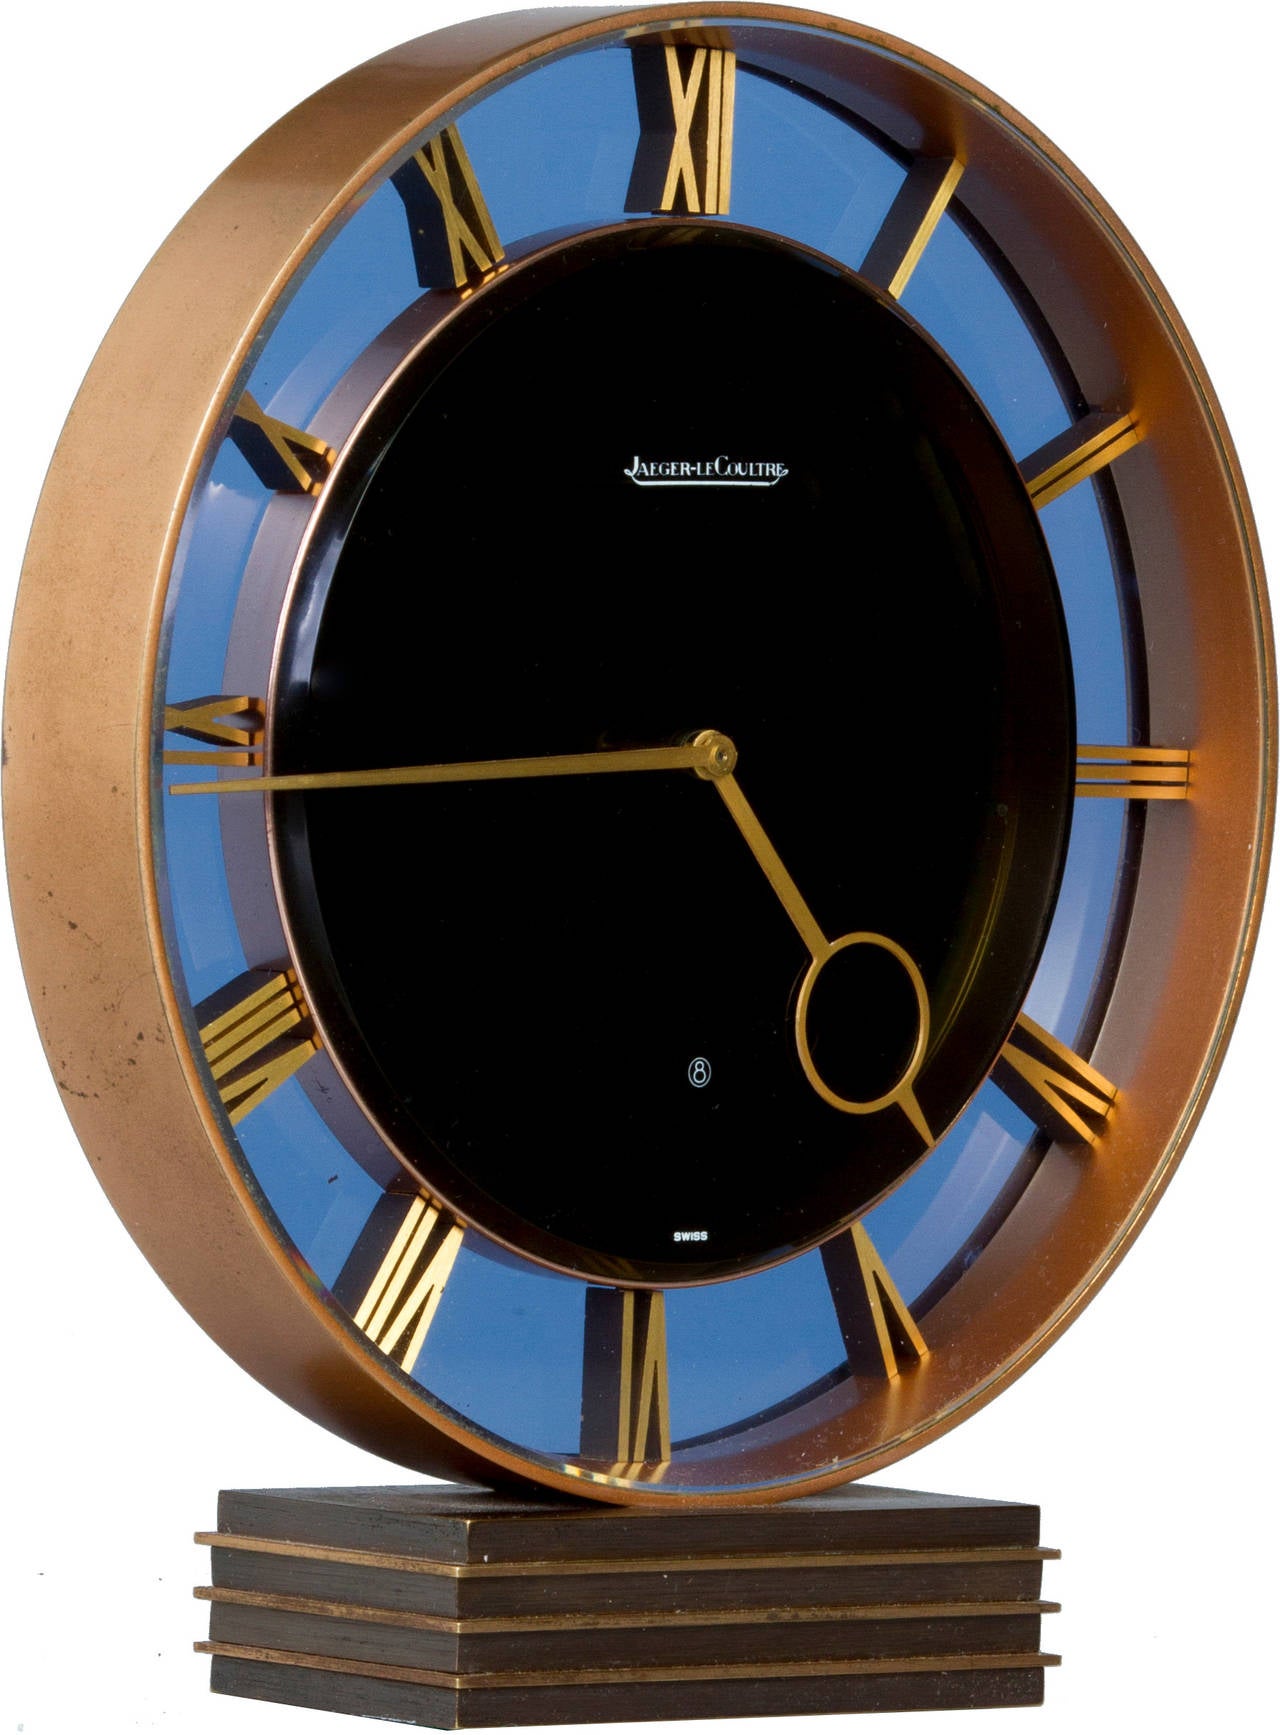 This is a rare clock featuring Art Moderne styling, Roman Numerals, a light  blue  and black glass face and a bronze dore case.